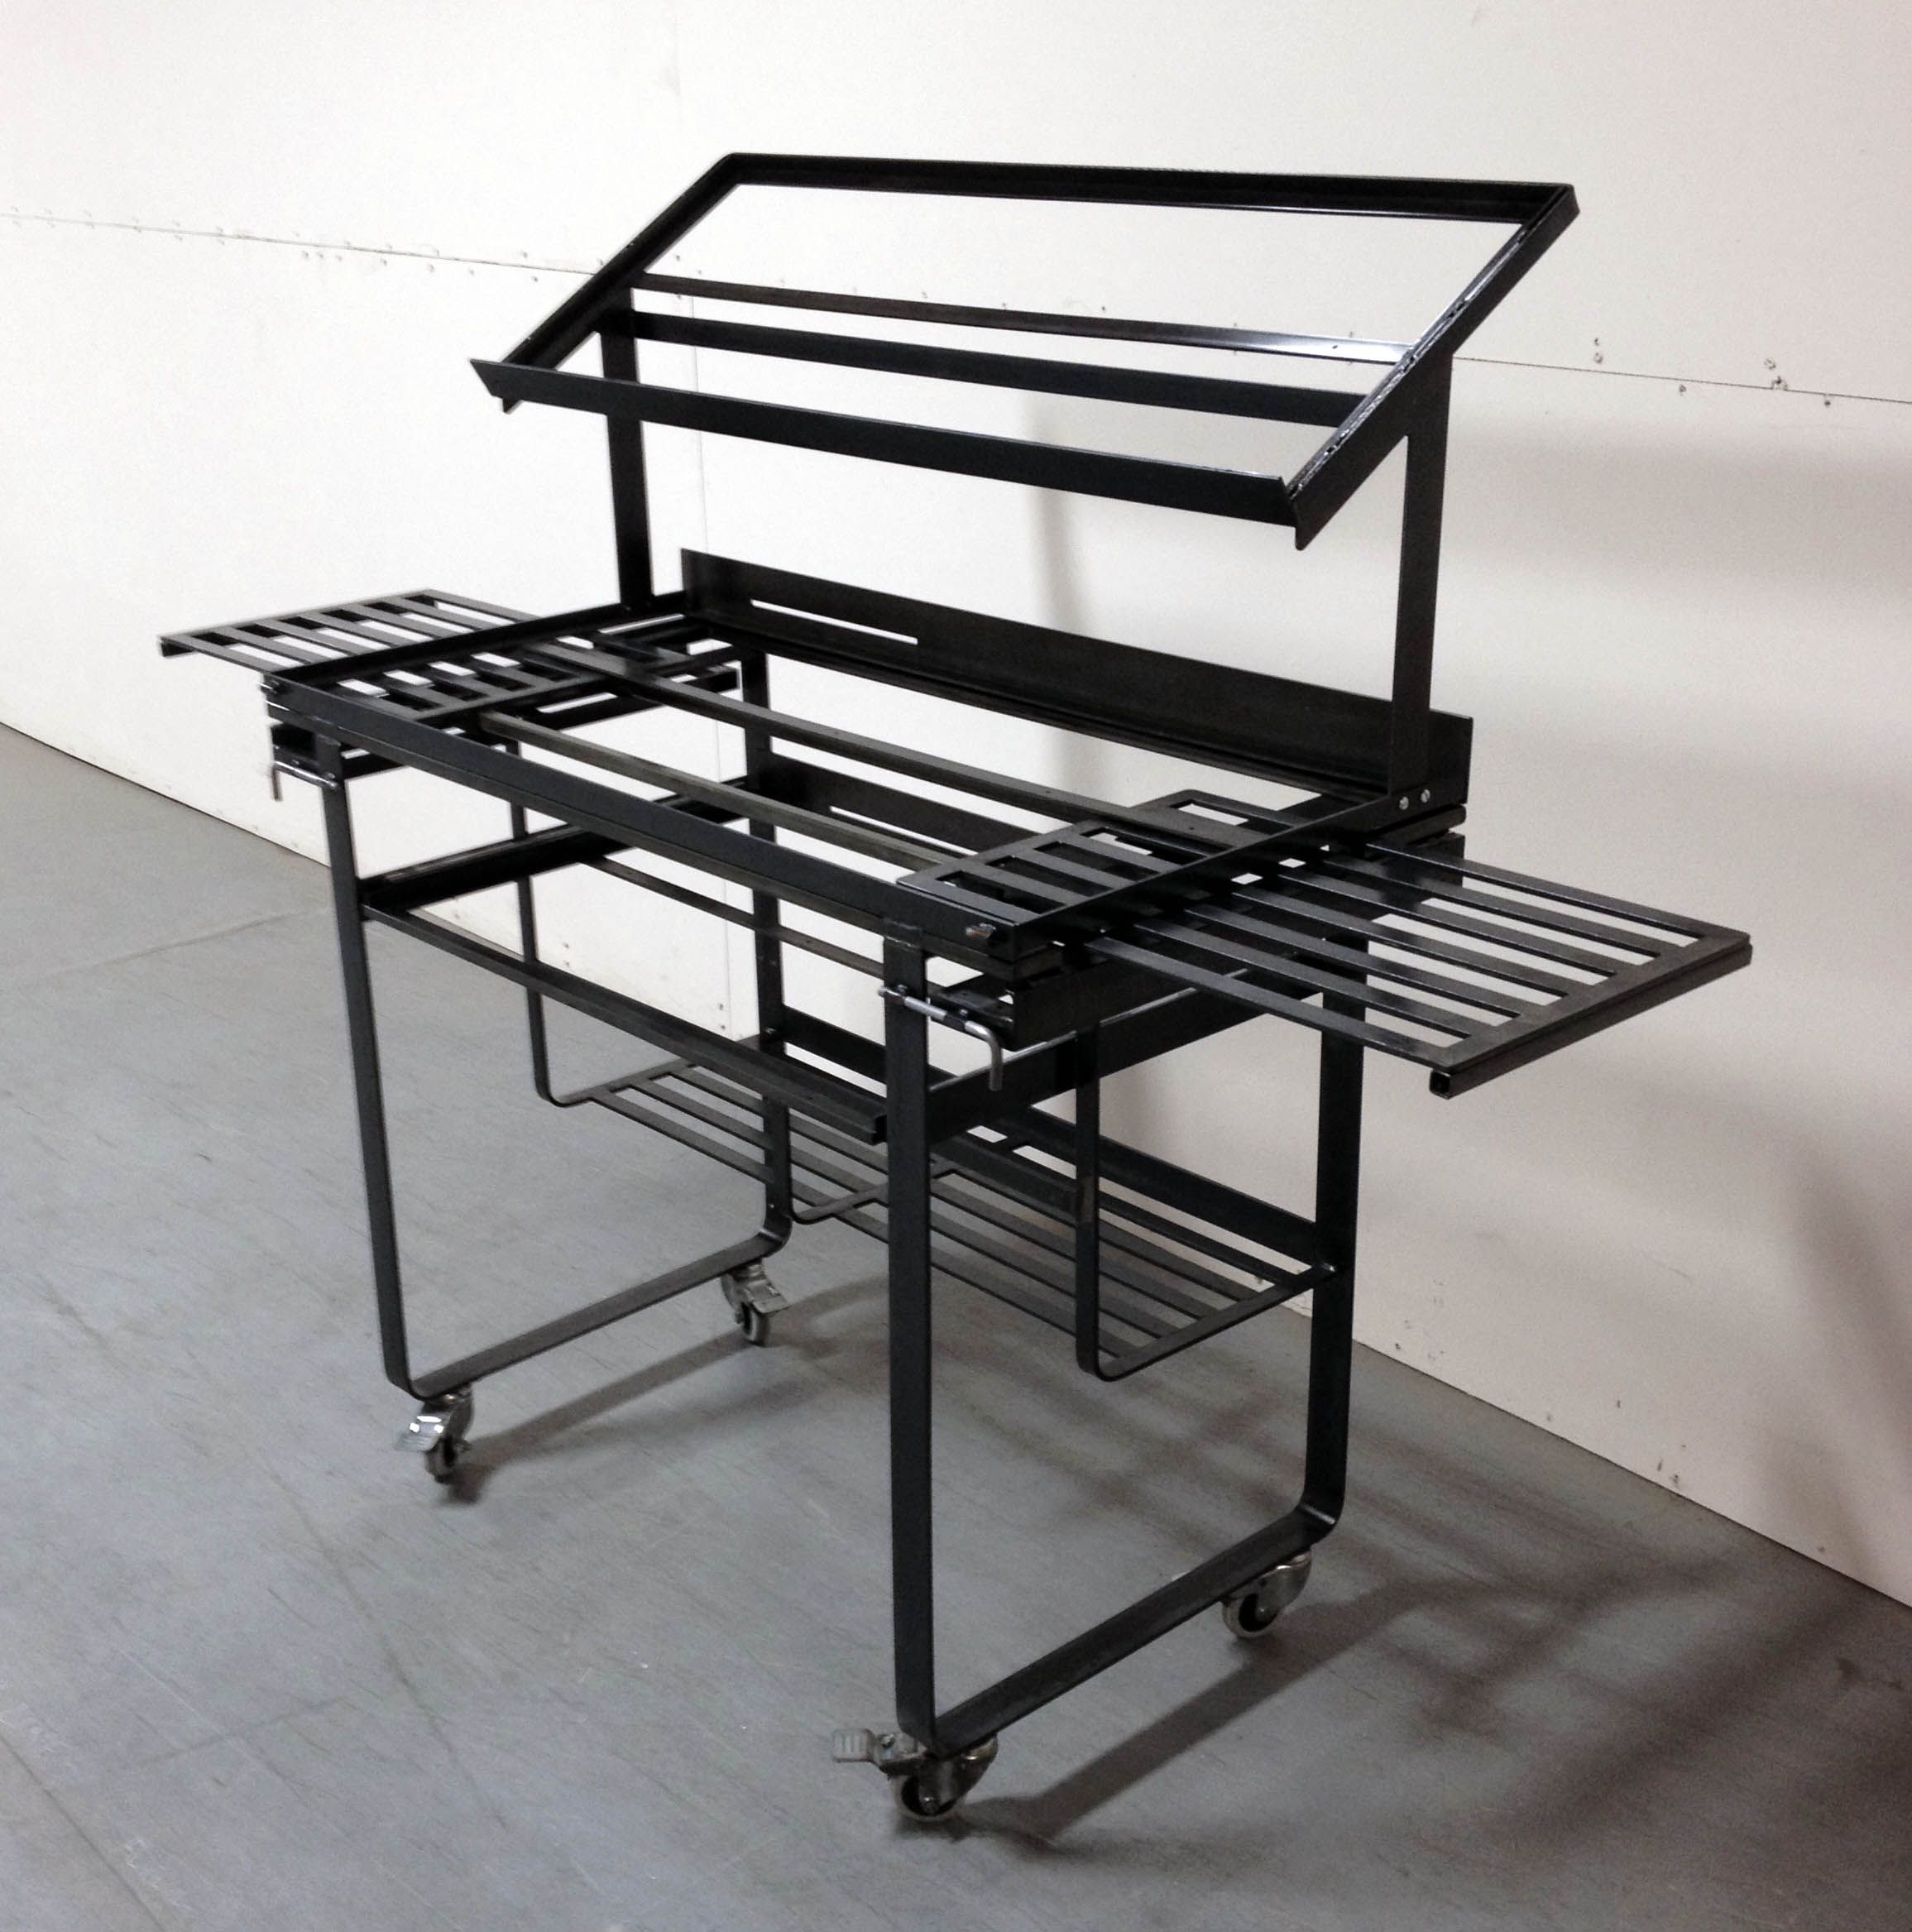 Buy A Handmade Custom Mobile Industrial Dj Stand Made To Order